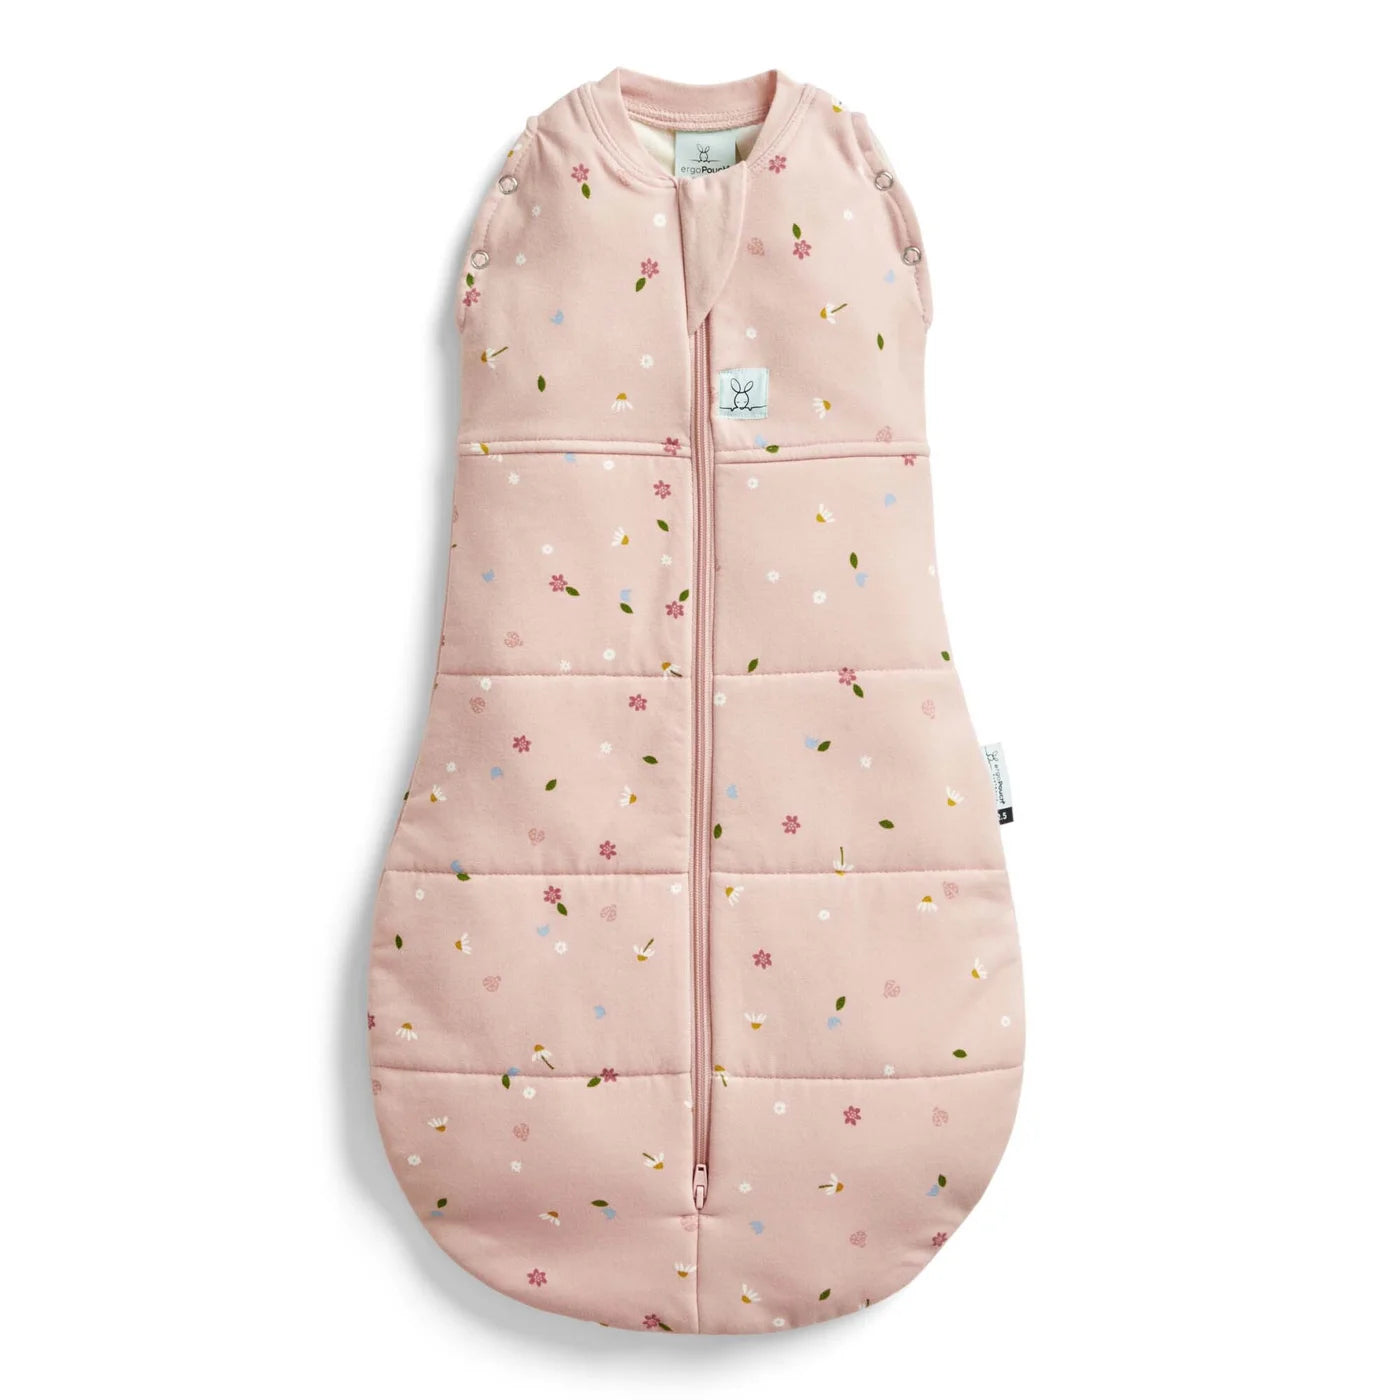 Ergo Pouch 2.5 tog Swaddle Bag (Daisies)